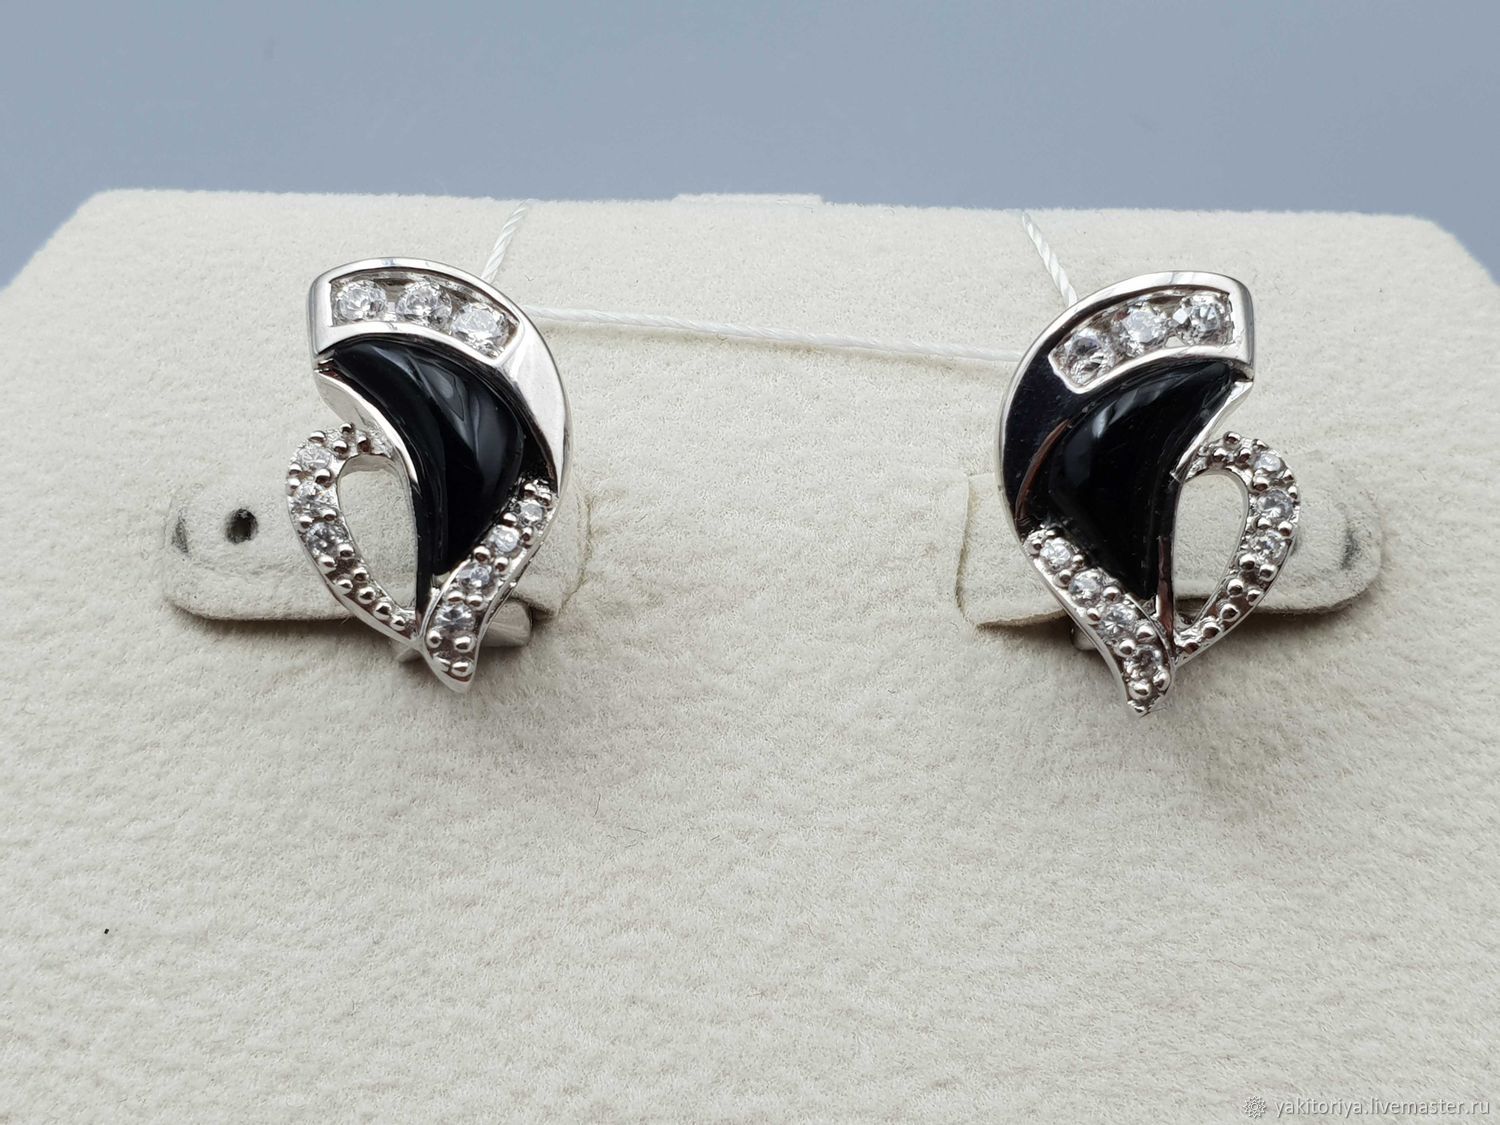 Silver earrings with black onyx and cubic zirconia, Earrings, Moscow,  Фото №1